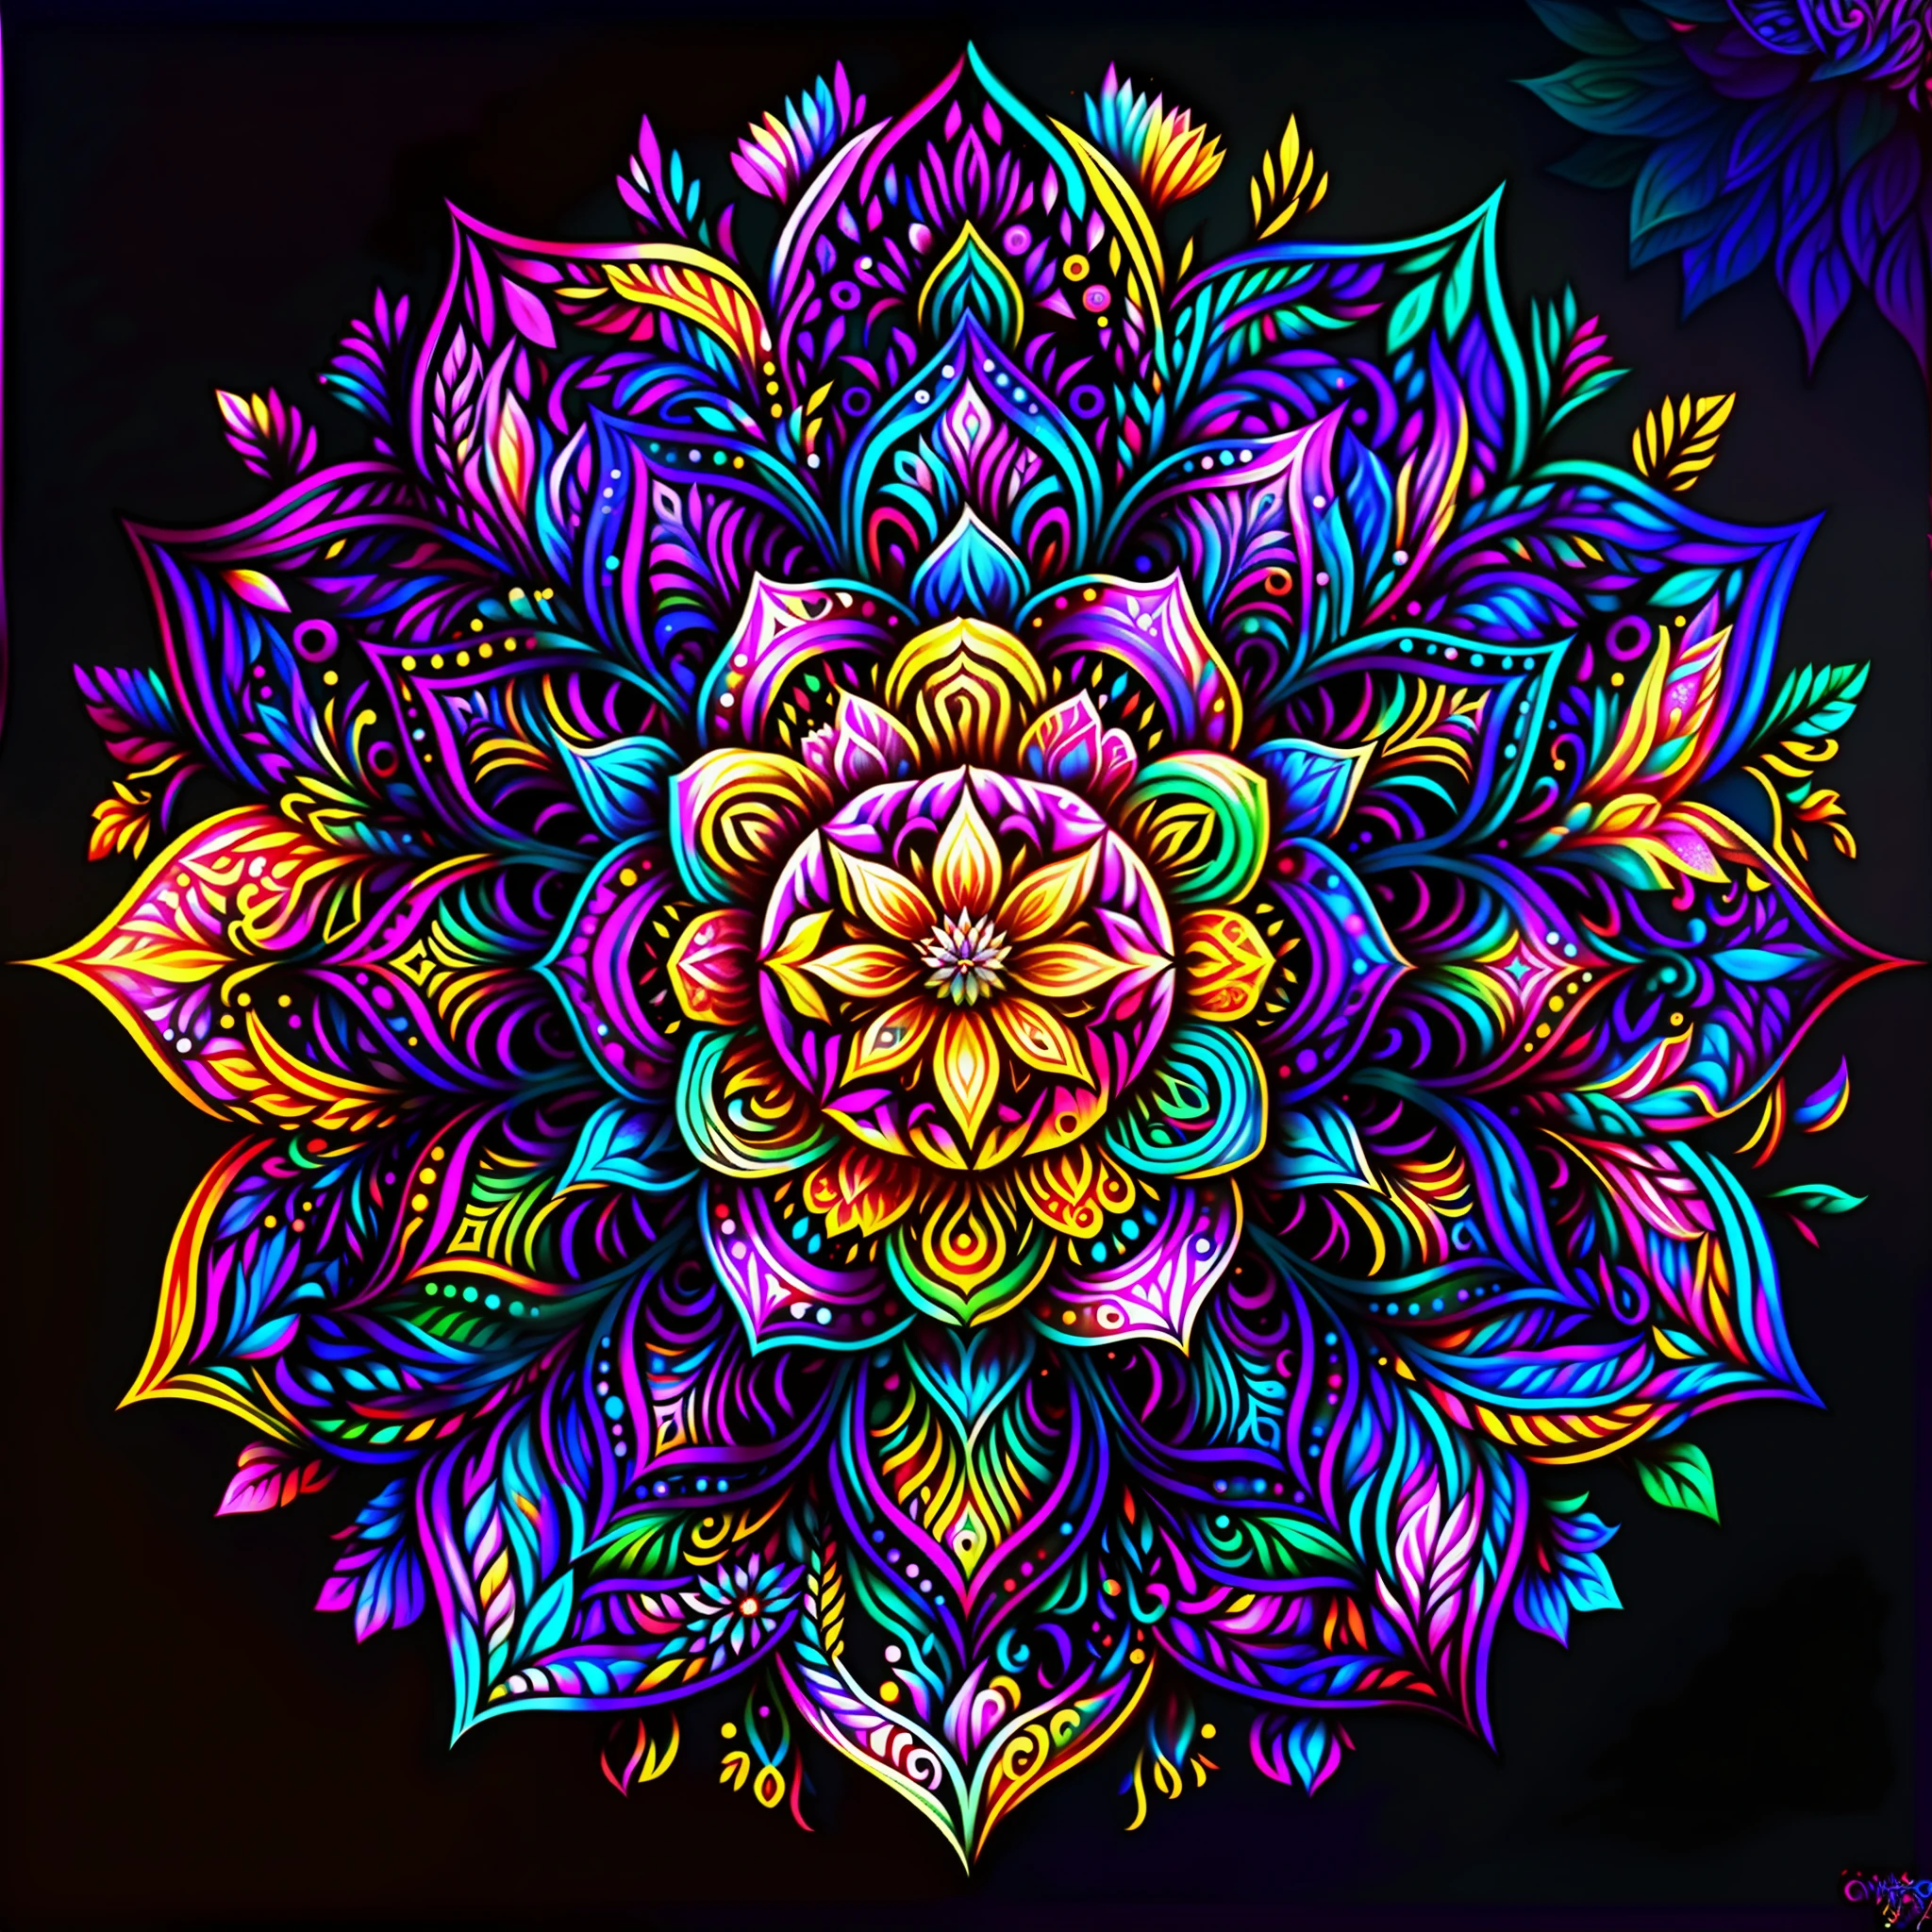 a colorful flower with a black background, colorful mandala, mandala art, lotus mandala, mandala ornament, super detailed color art, mandalas, rainbow gradient bloom, colorful intricate masterpiece, detailed art in color, intricate colorful masterpiece, mandalas, super detailed color art, psychedelic art style, intricate colorful, ornate flower design, vibrant high contrast coloring, multicolored vector art